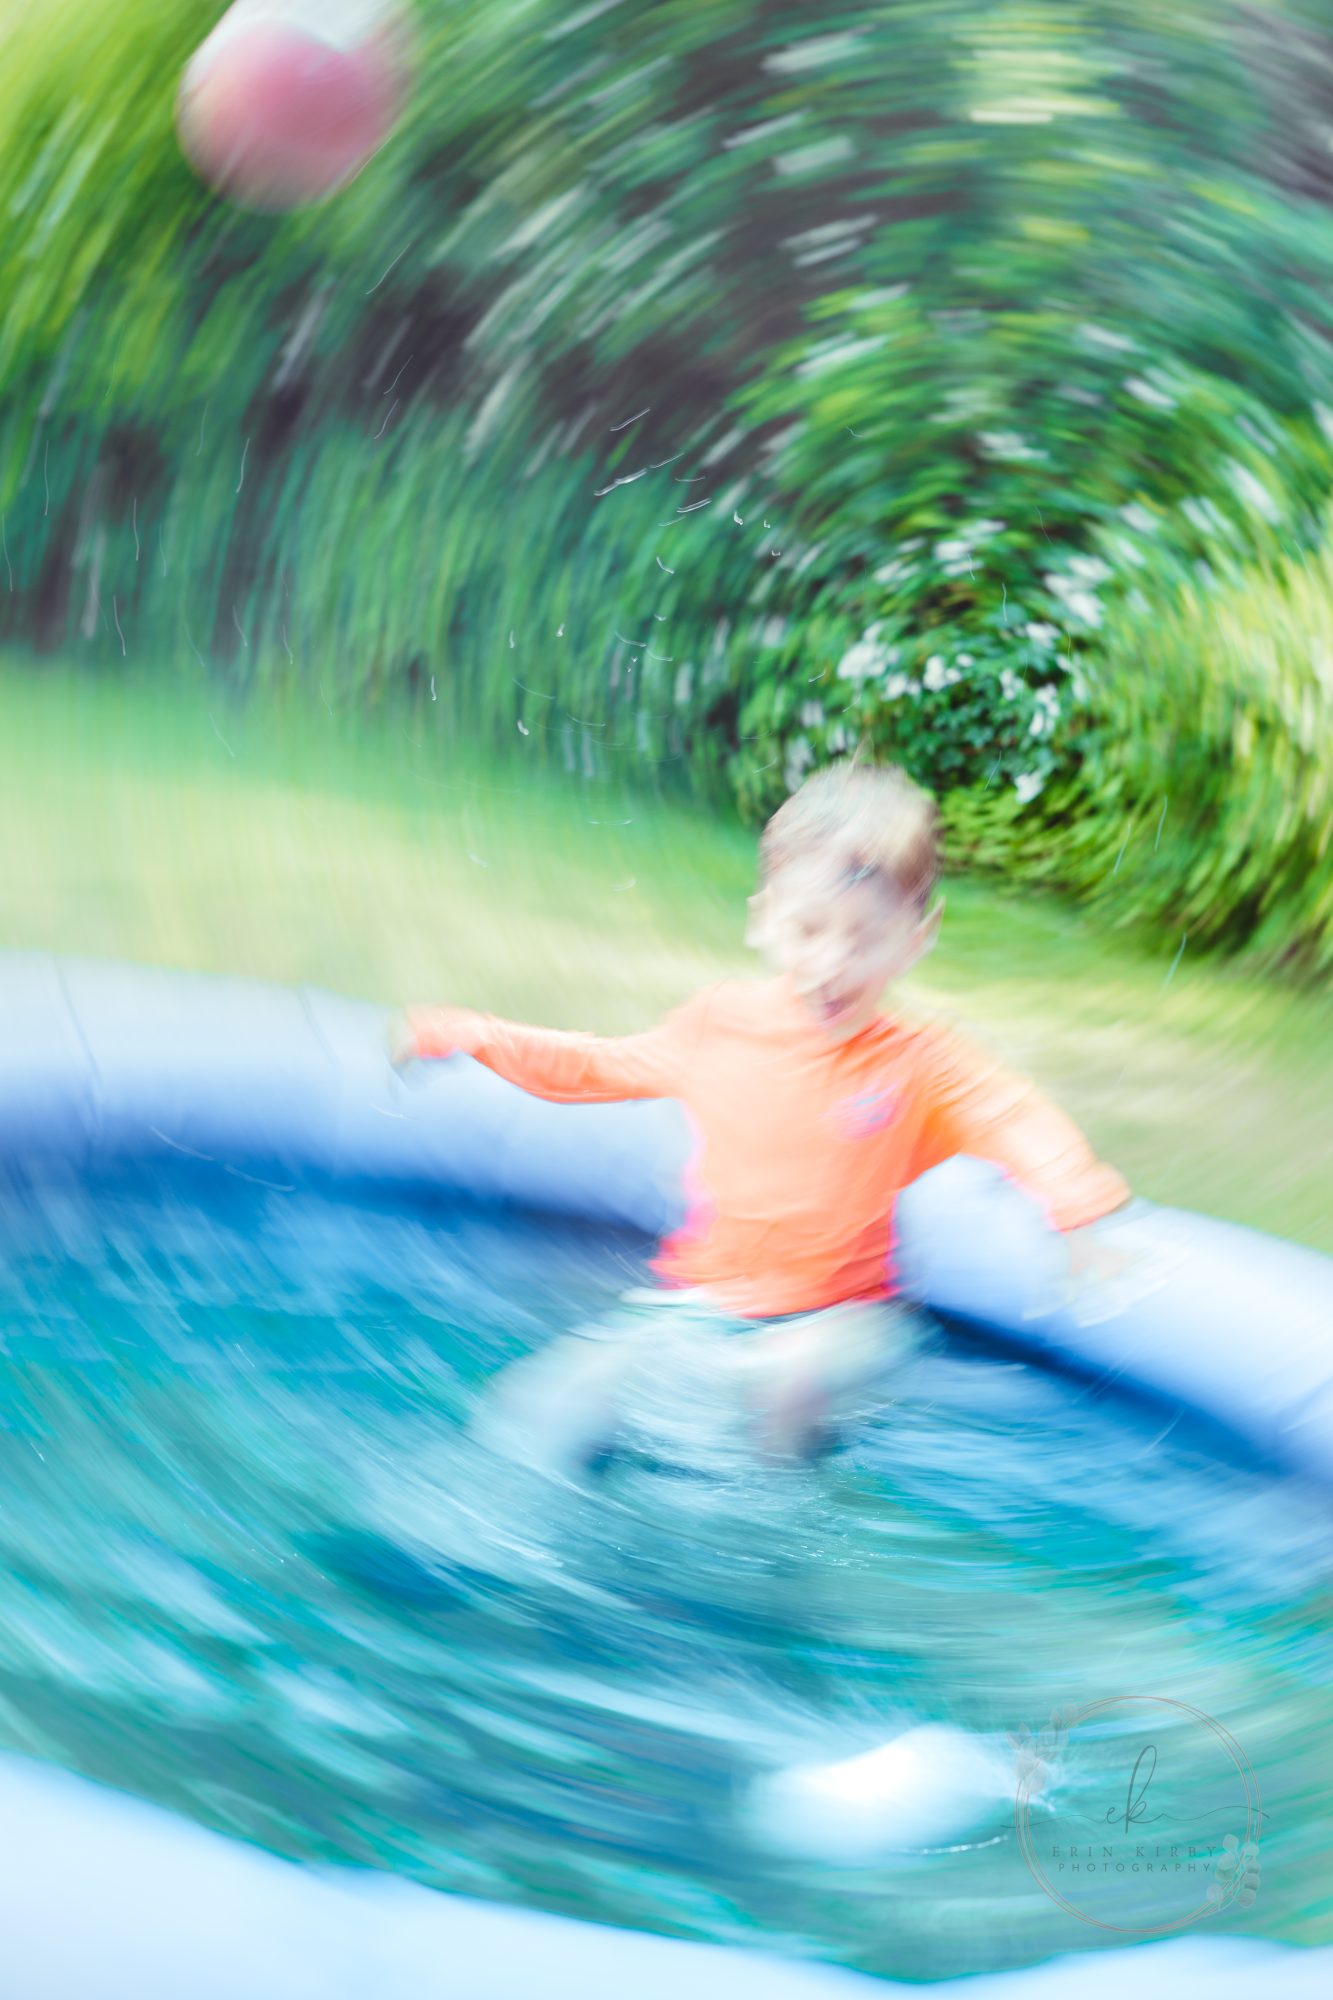 A boy with short light hair and fair skin jumps into a pool. In the background are green grass and bushes. A ball flies up in the air to the left of the screen. The image is blurred in a circle